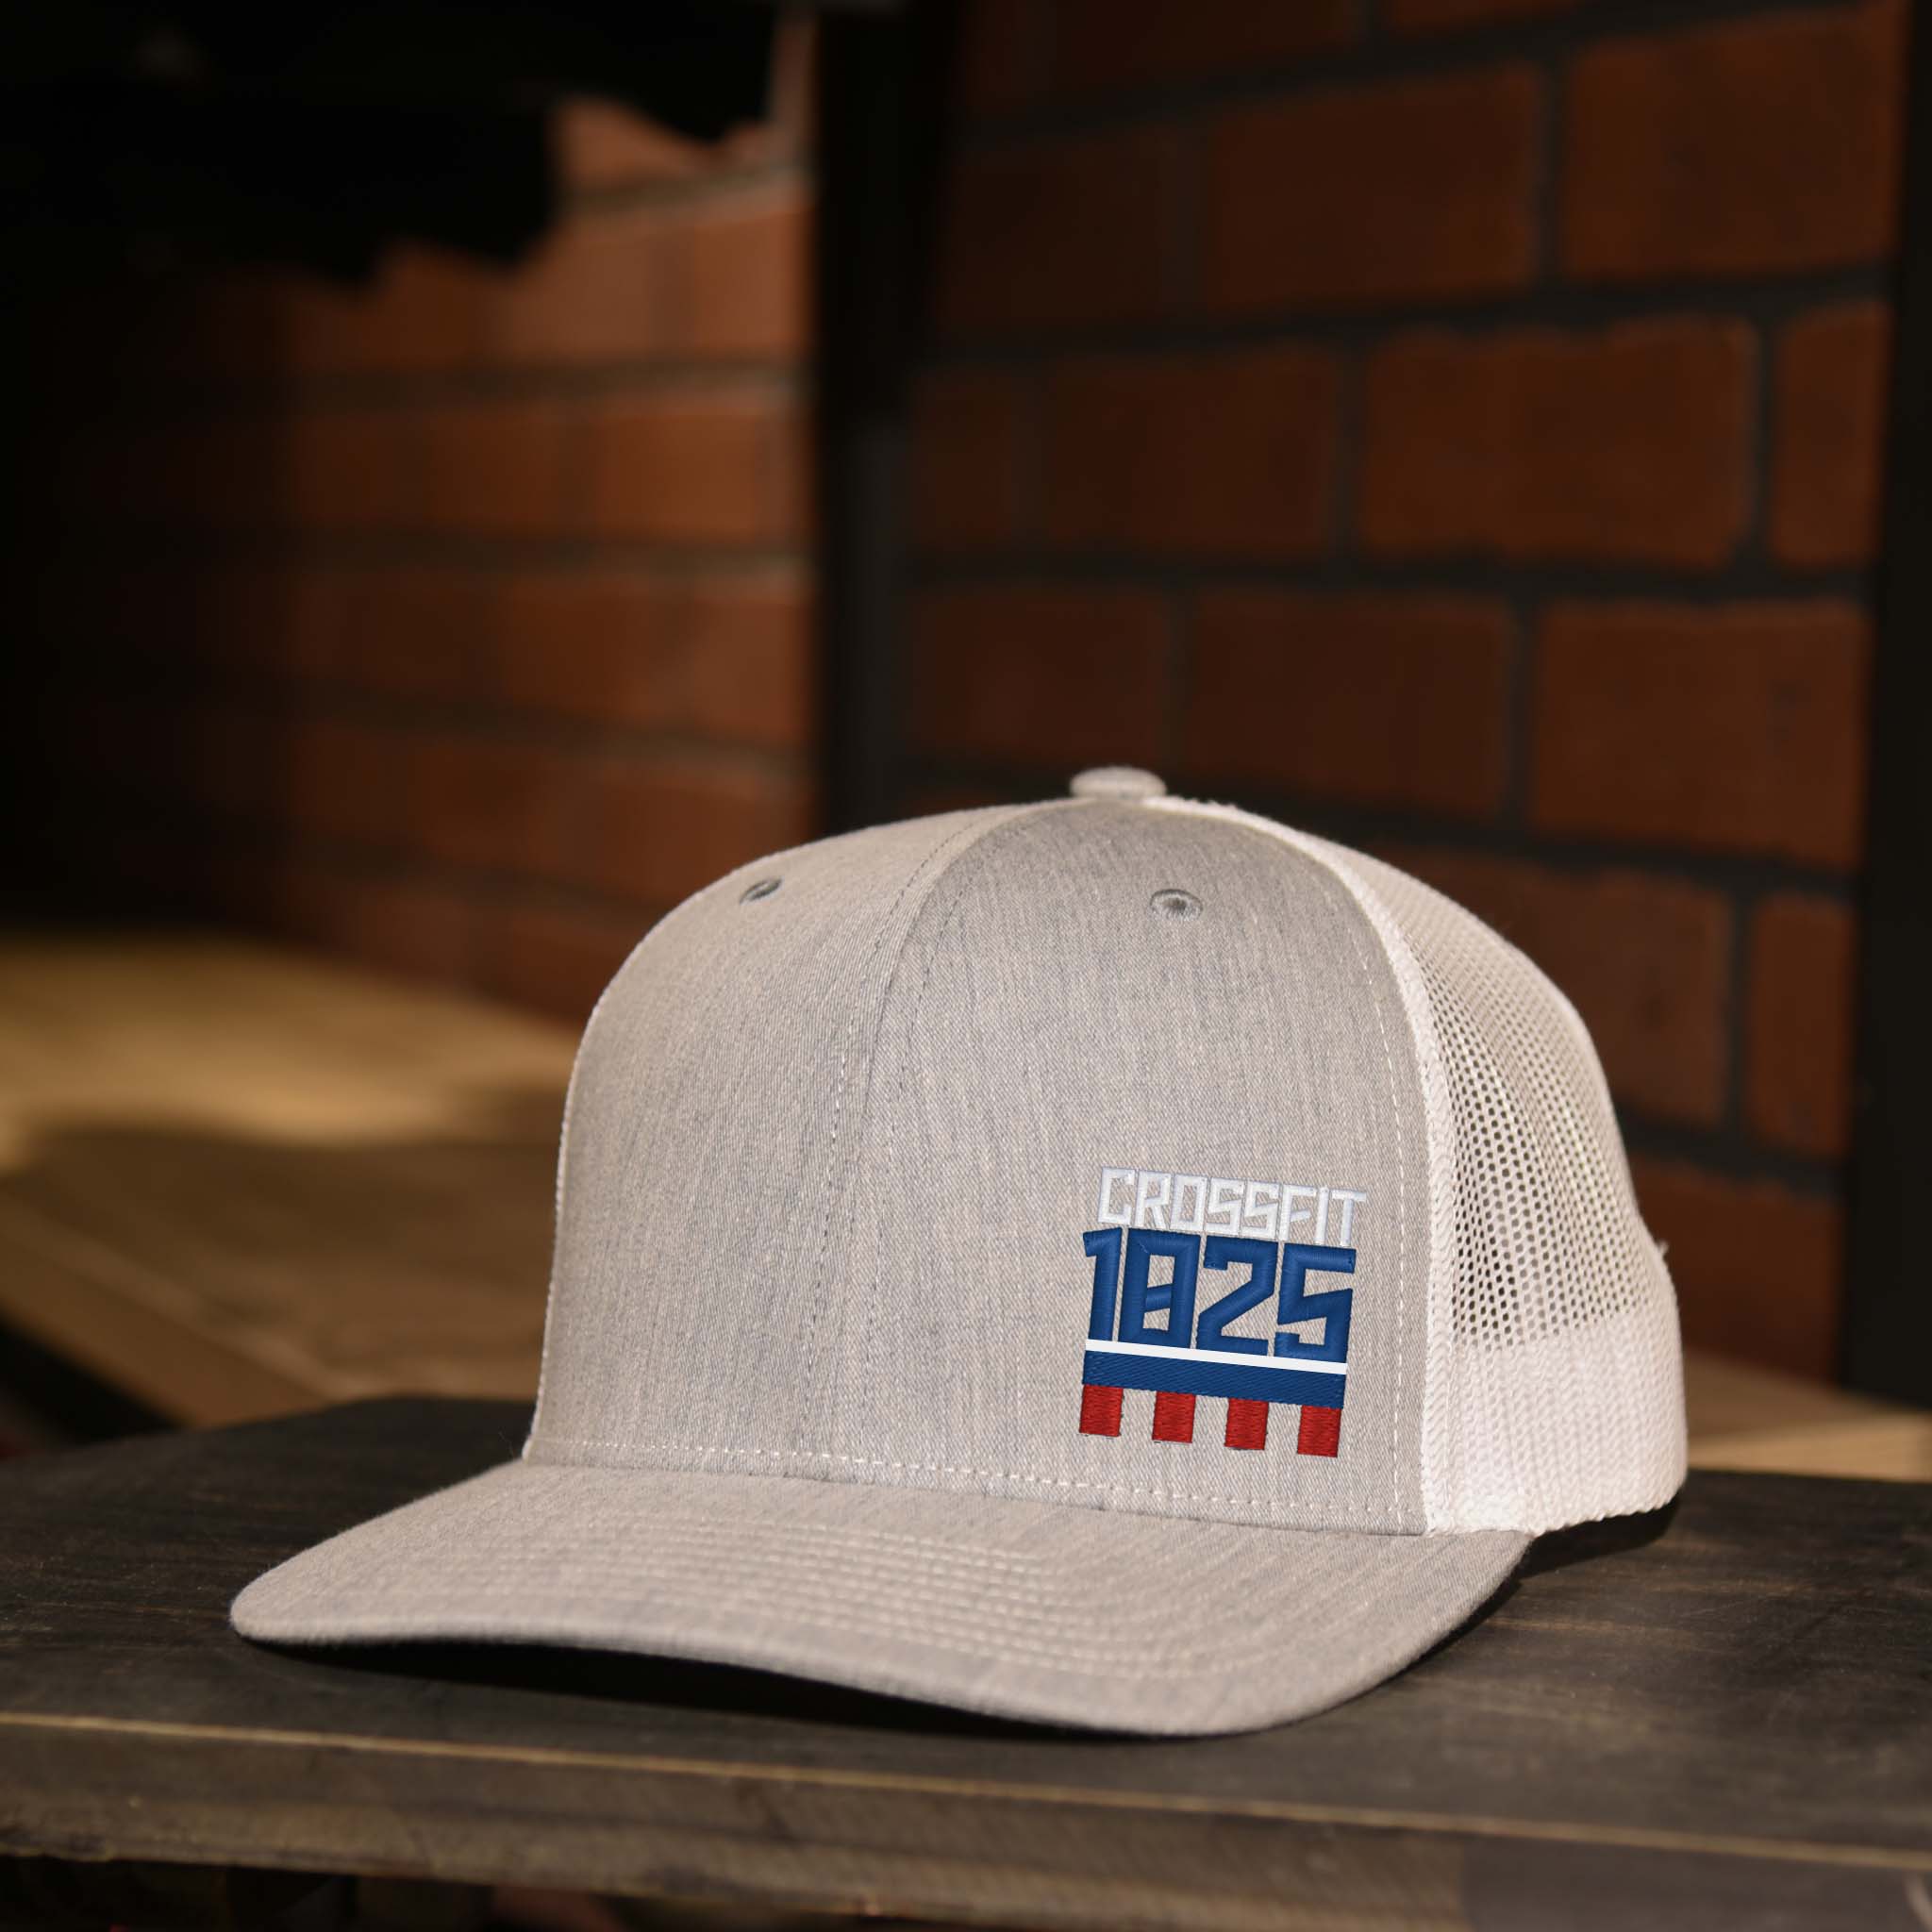 CrossFit 1825 Heather Gray & White Trucker Hat with Red, White, and Blue Embroidered Logo